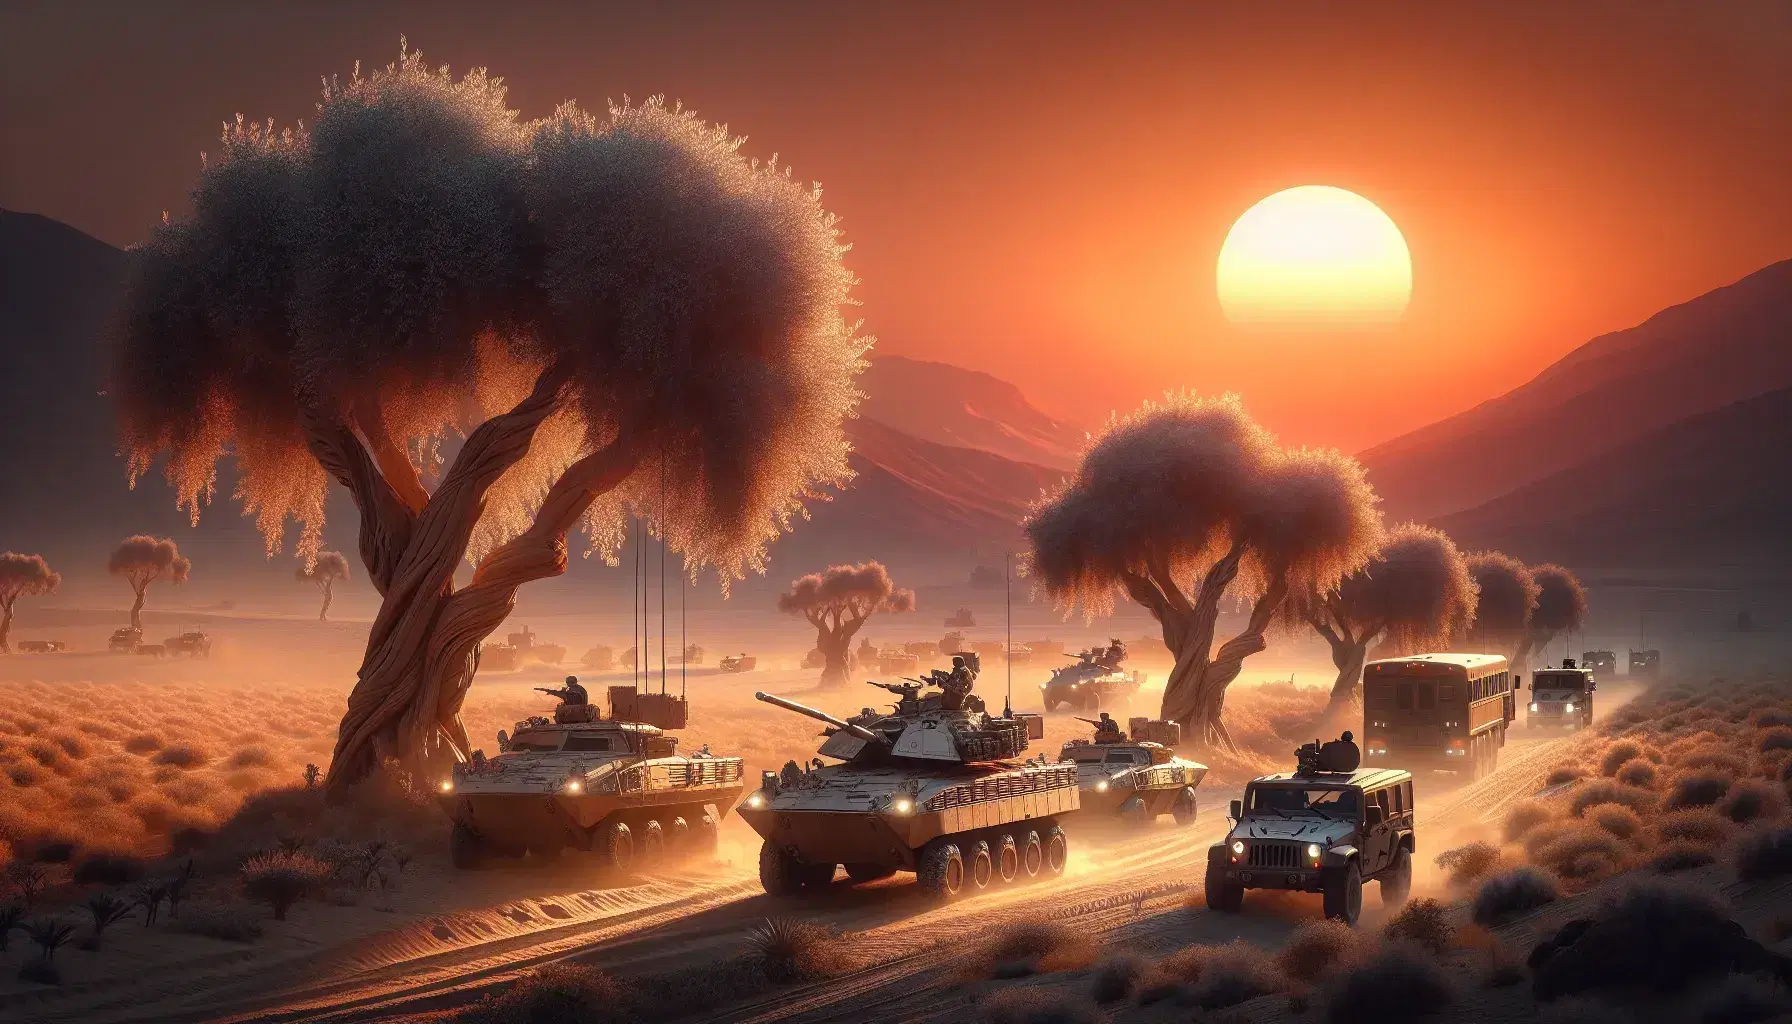 Desert dusk scene with olive trees in the foreground and a military convoy of tanks and jeeps traversing a dusty road against a mountain backdrop.